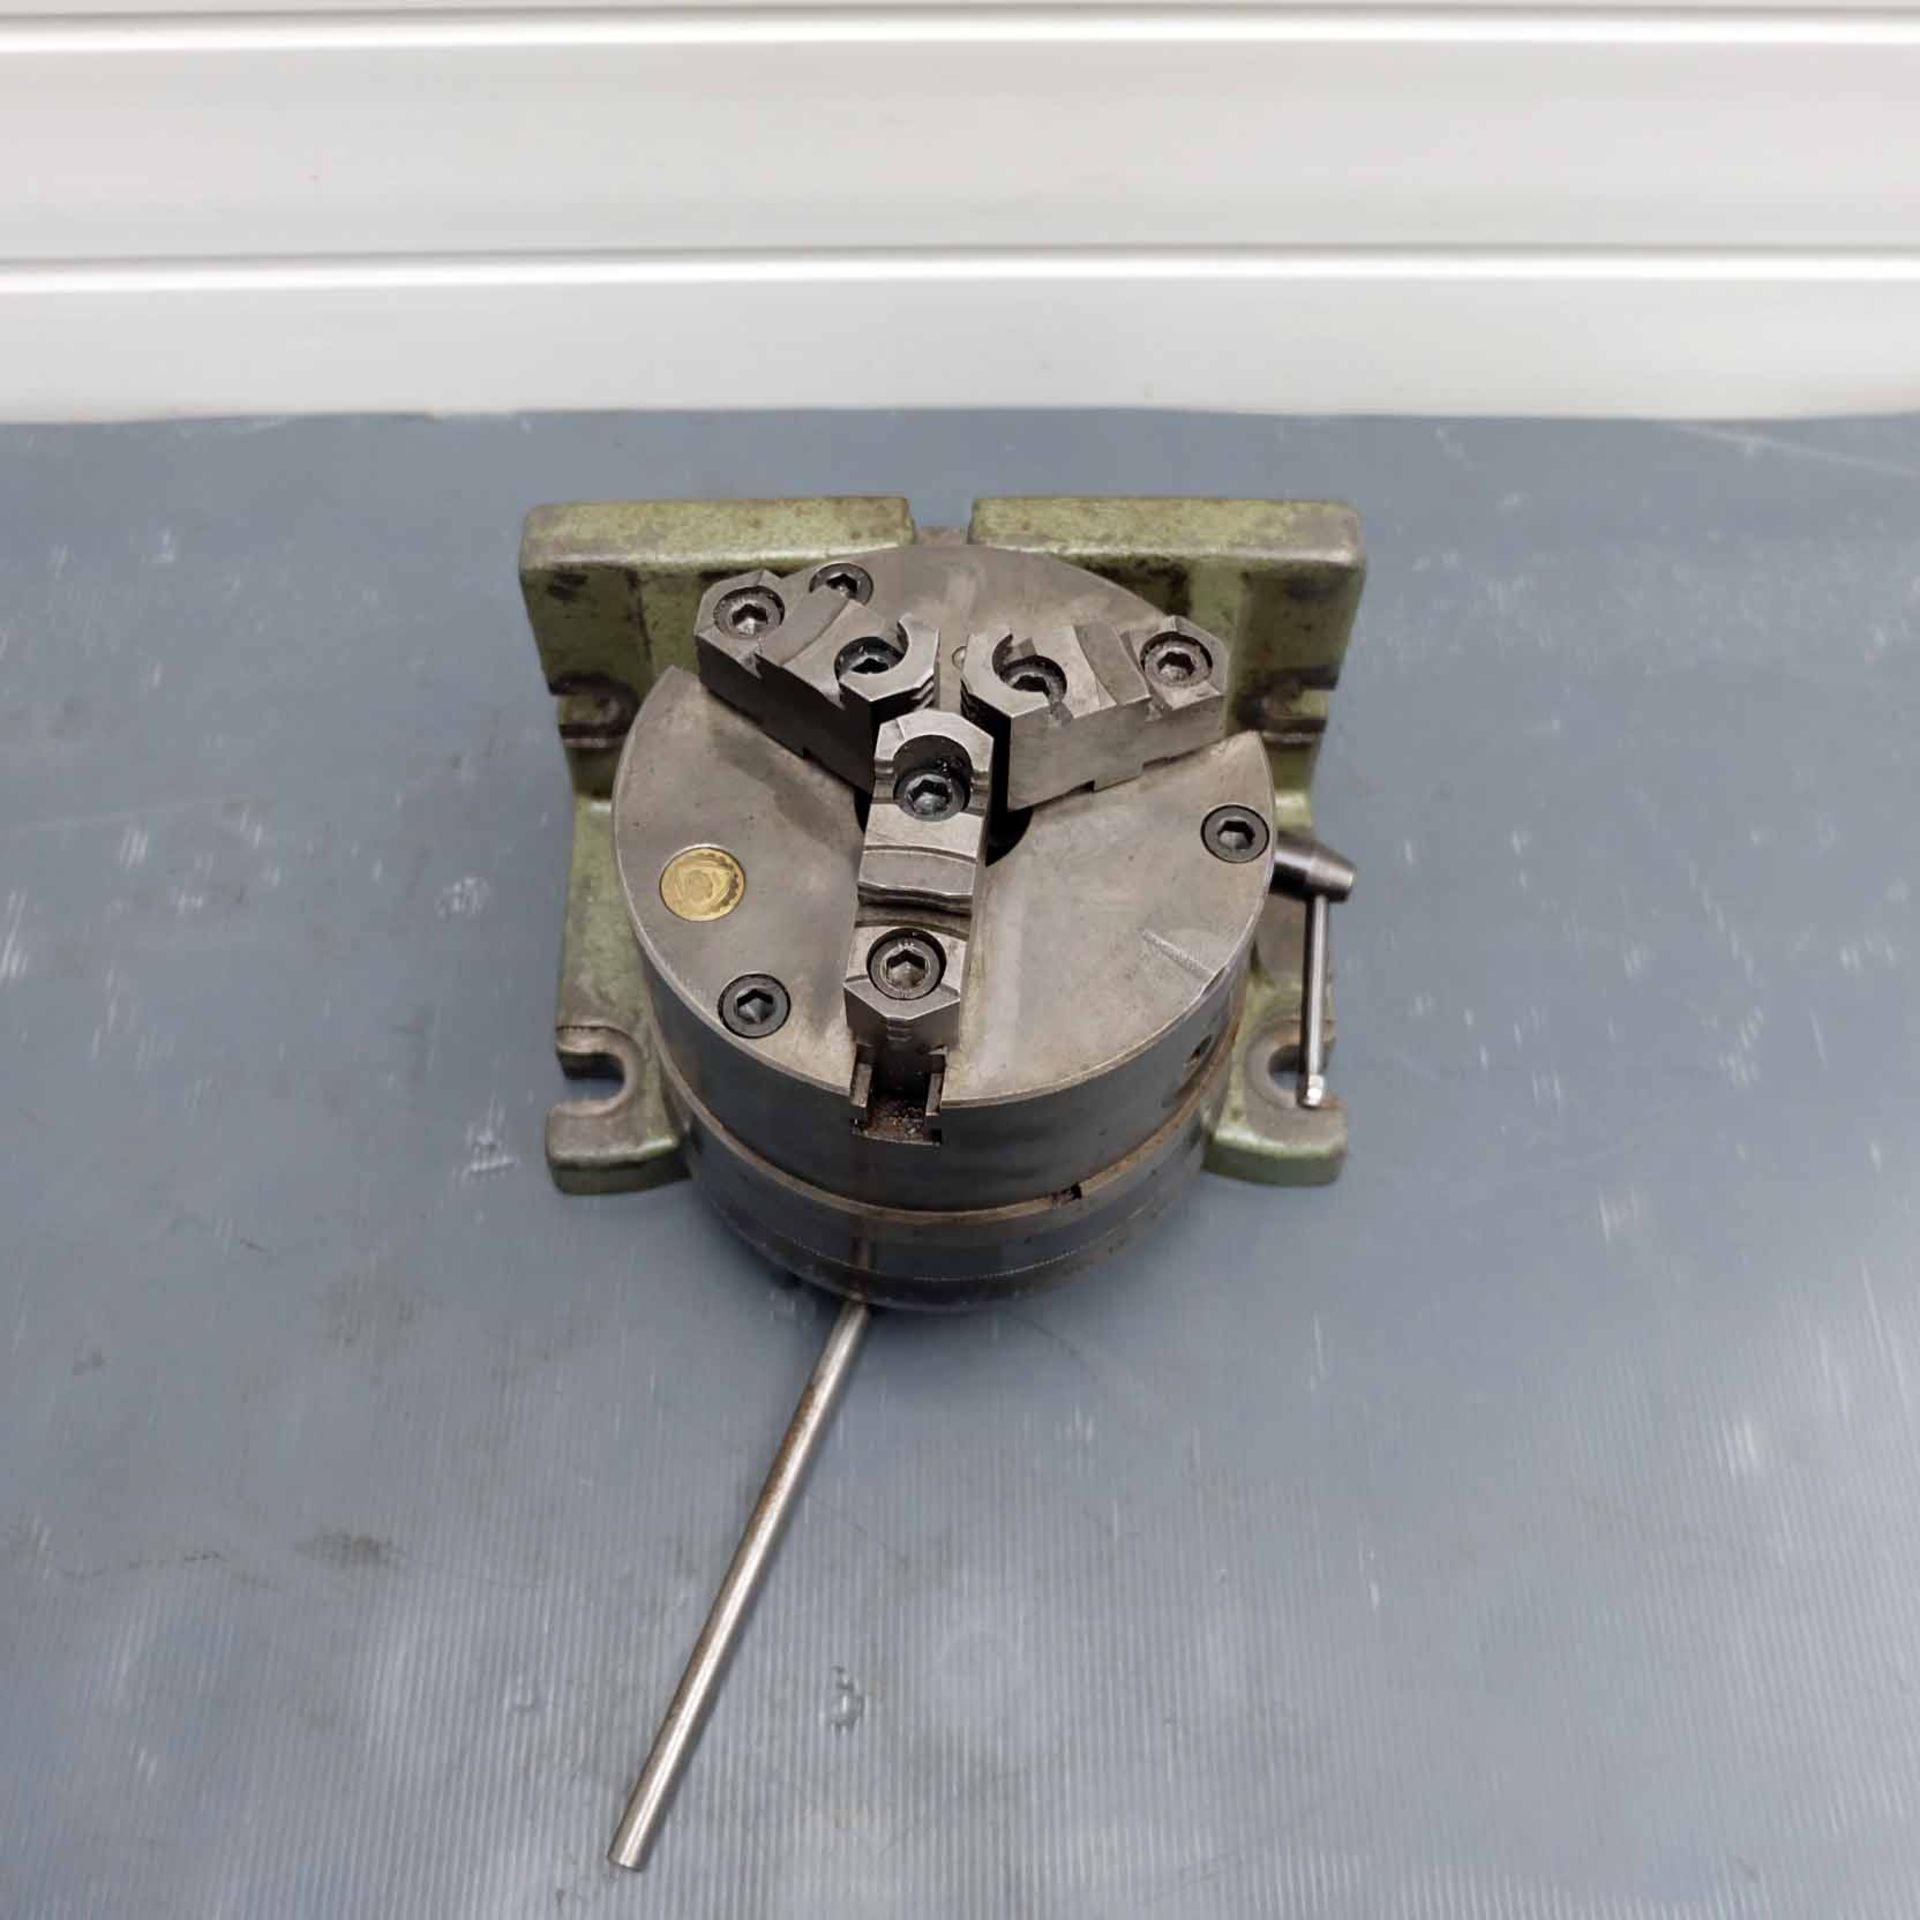 Vertical / Horizontal Indexing Workhead. With 6" 3 Jaw Chuck. Tailstock. - Image 10 of 11